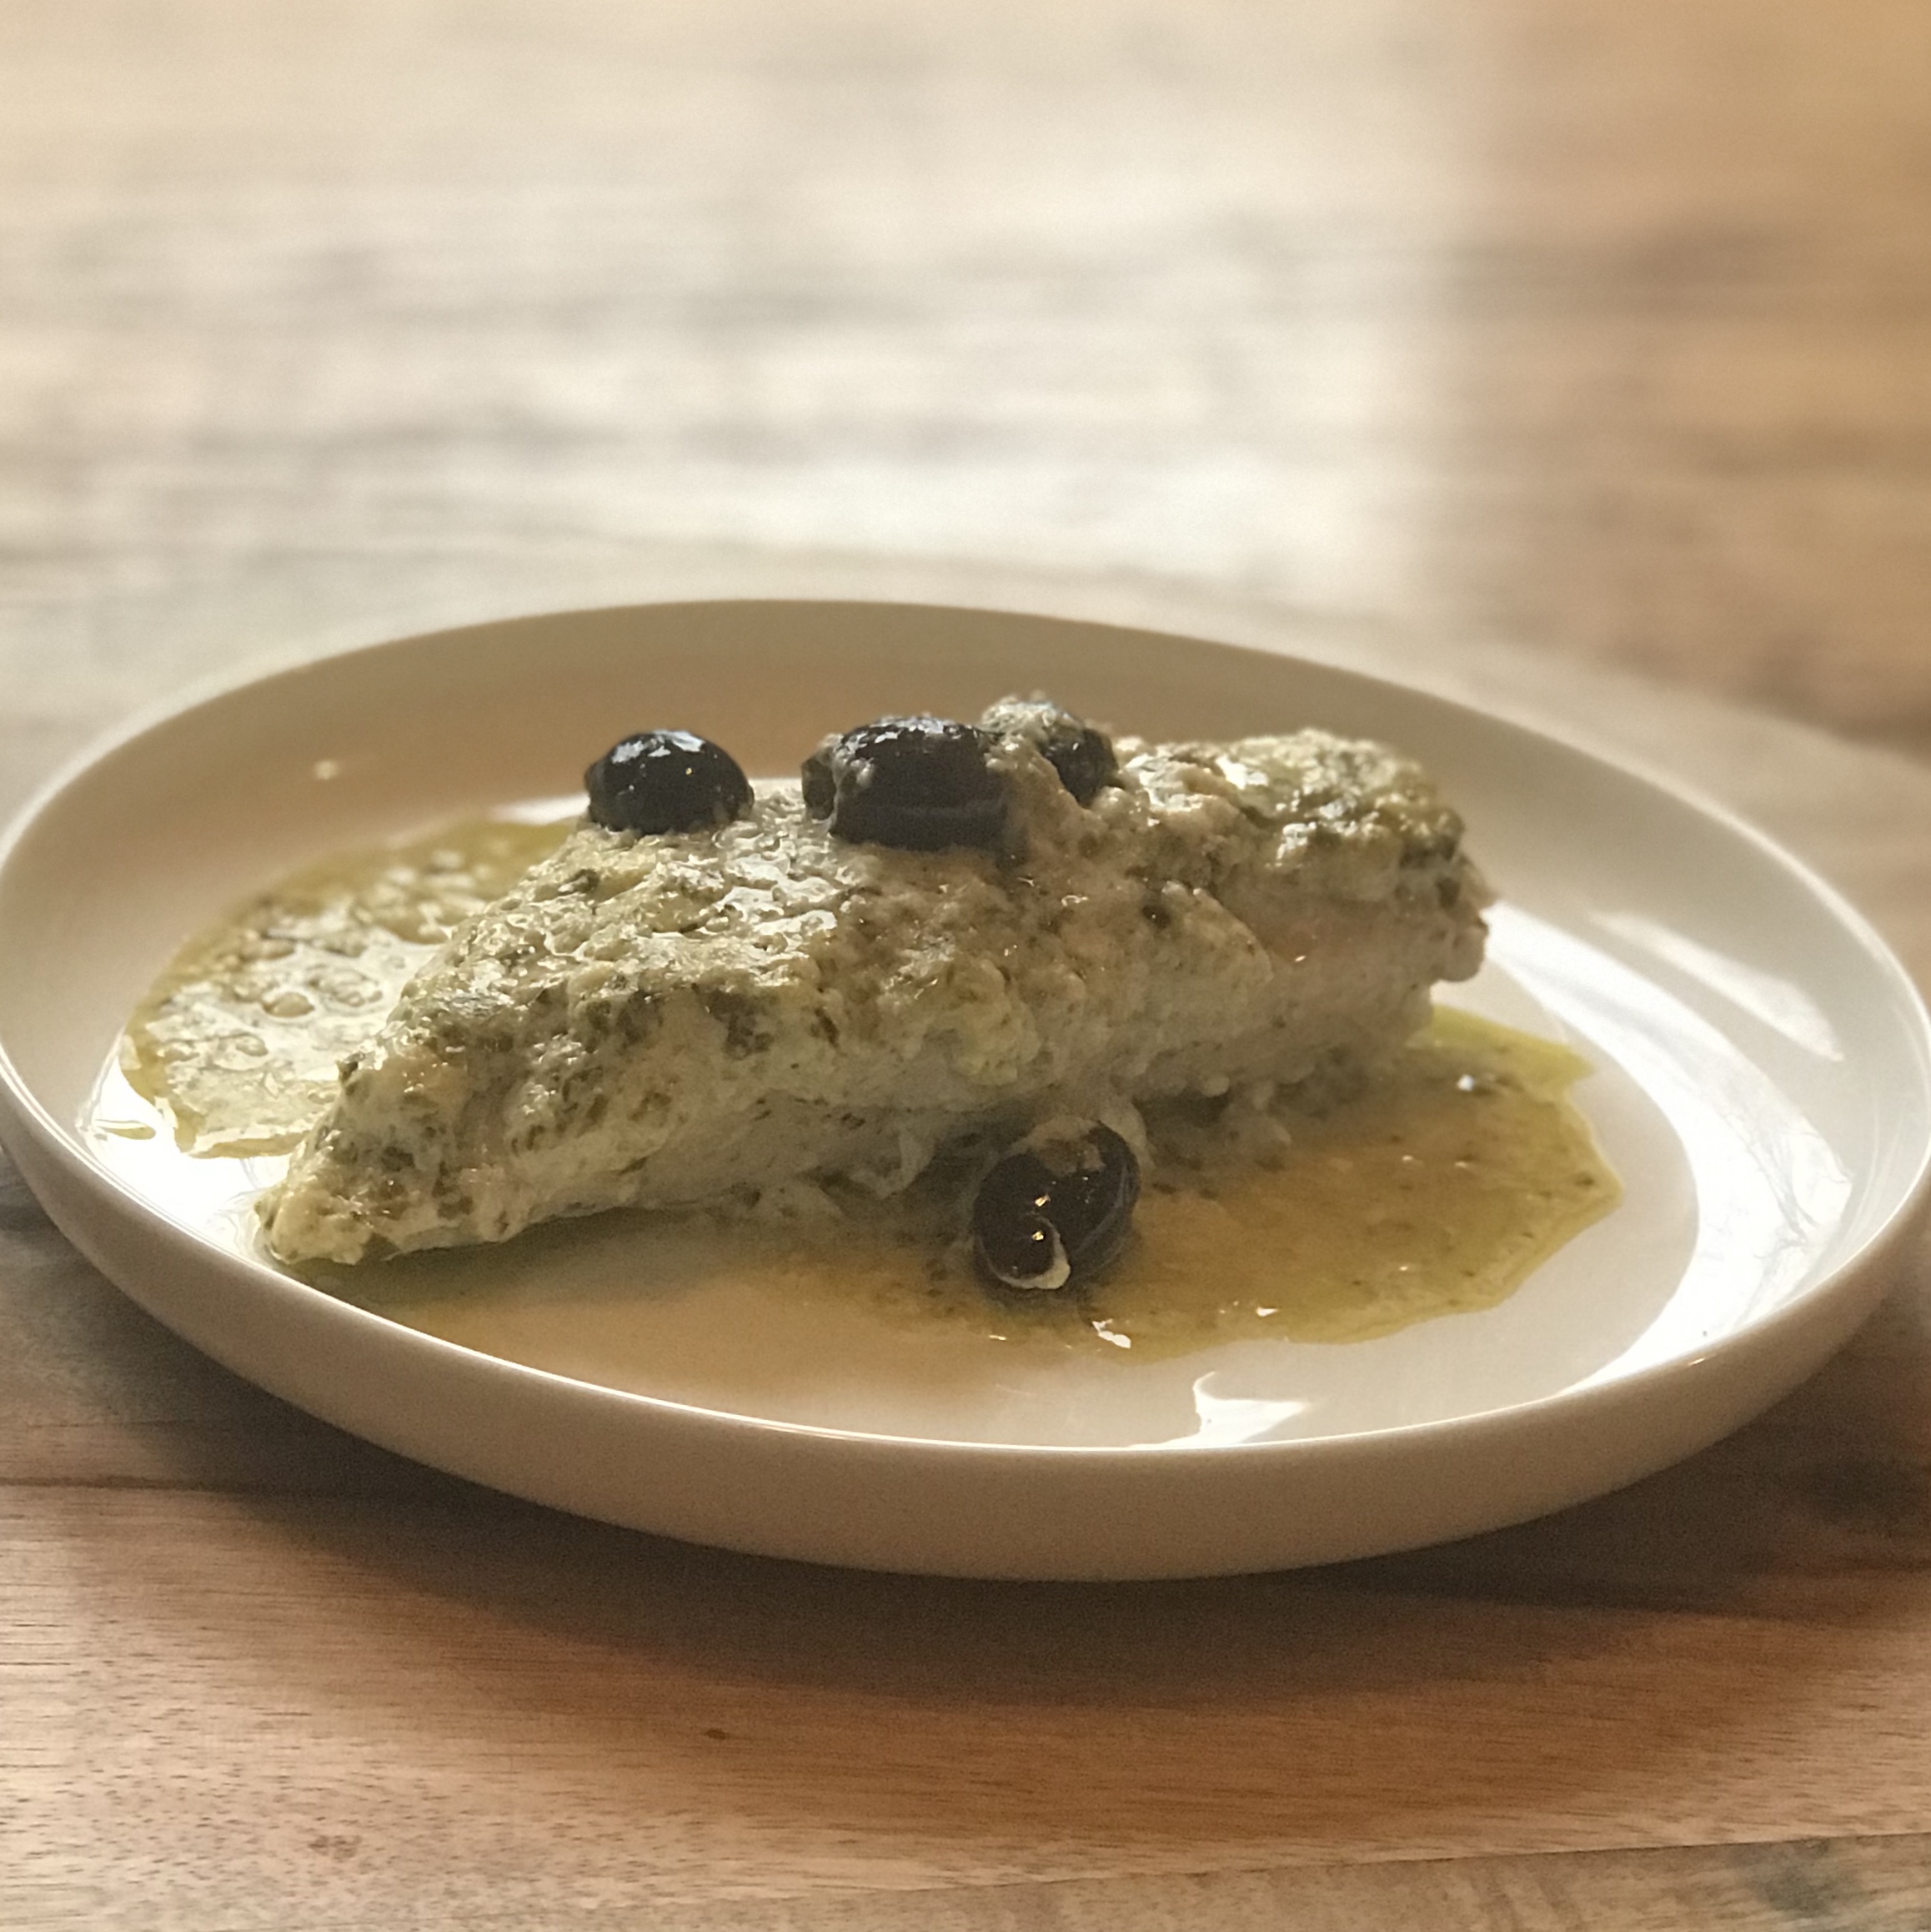 Pesto Chicken Casserole with Feta Cheese and Olives